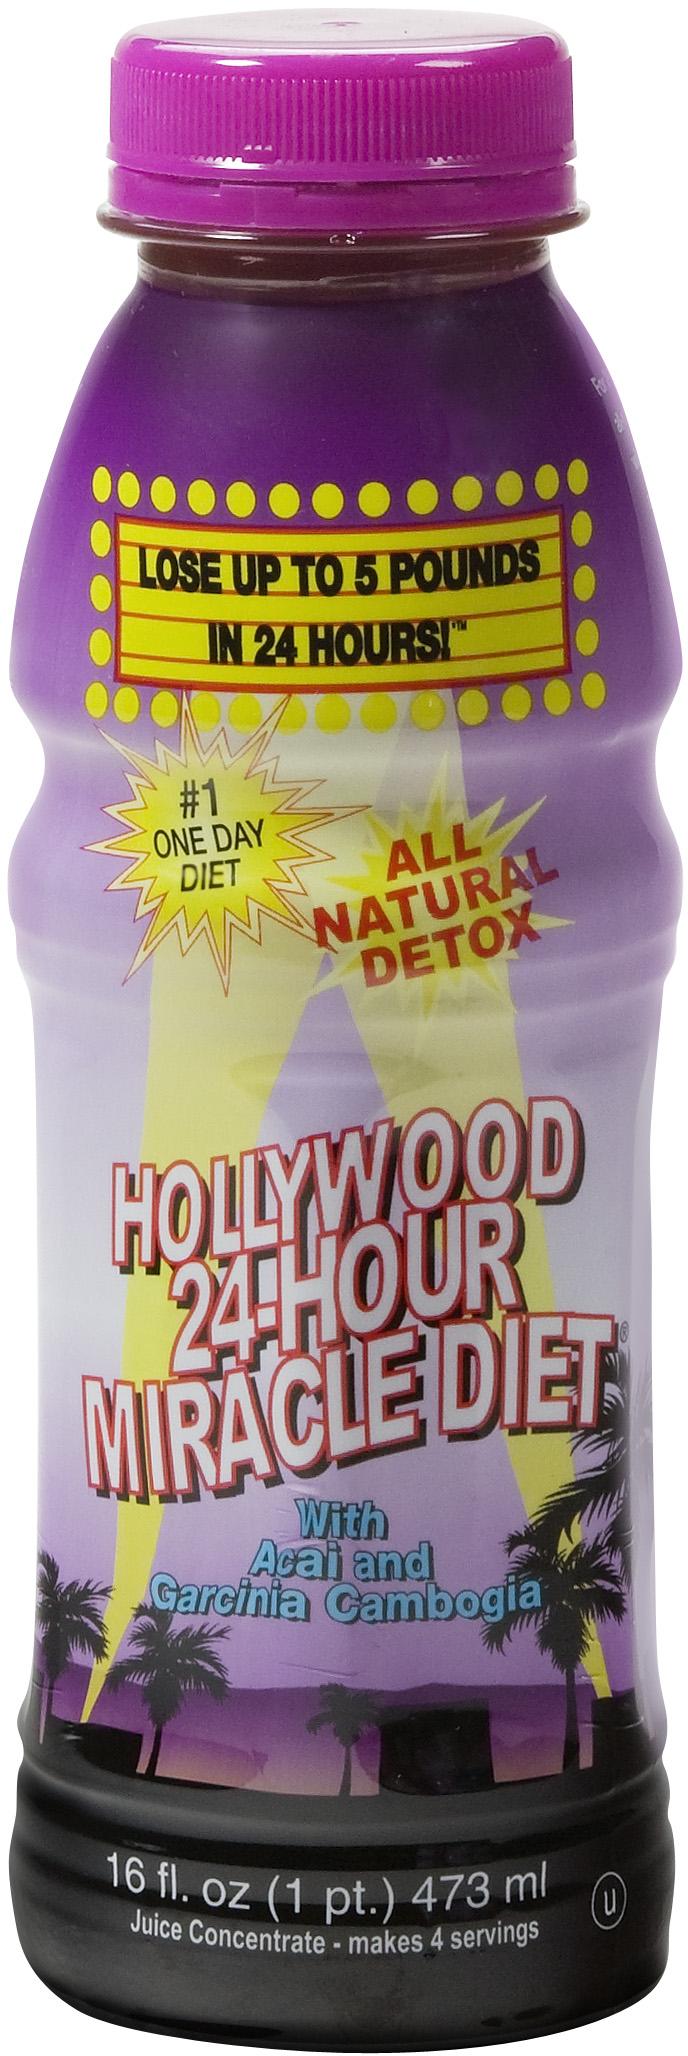 Hollywood 24-Hour Miracle Diet